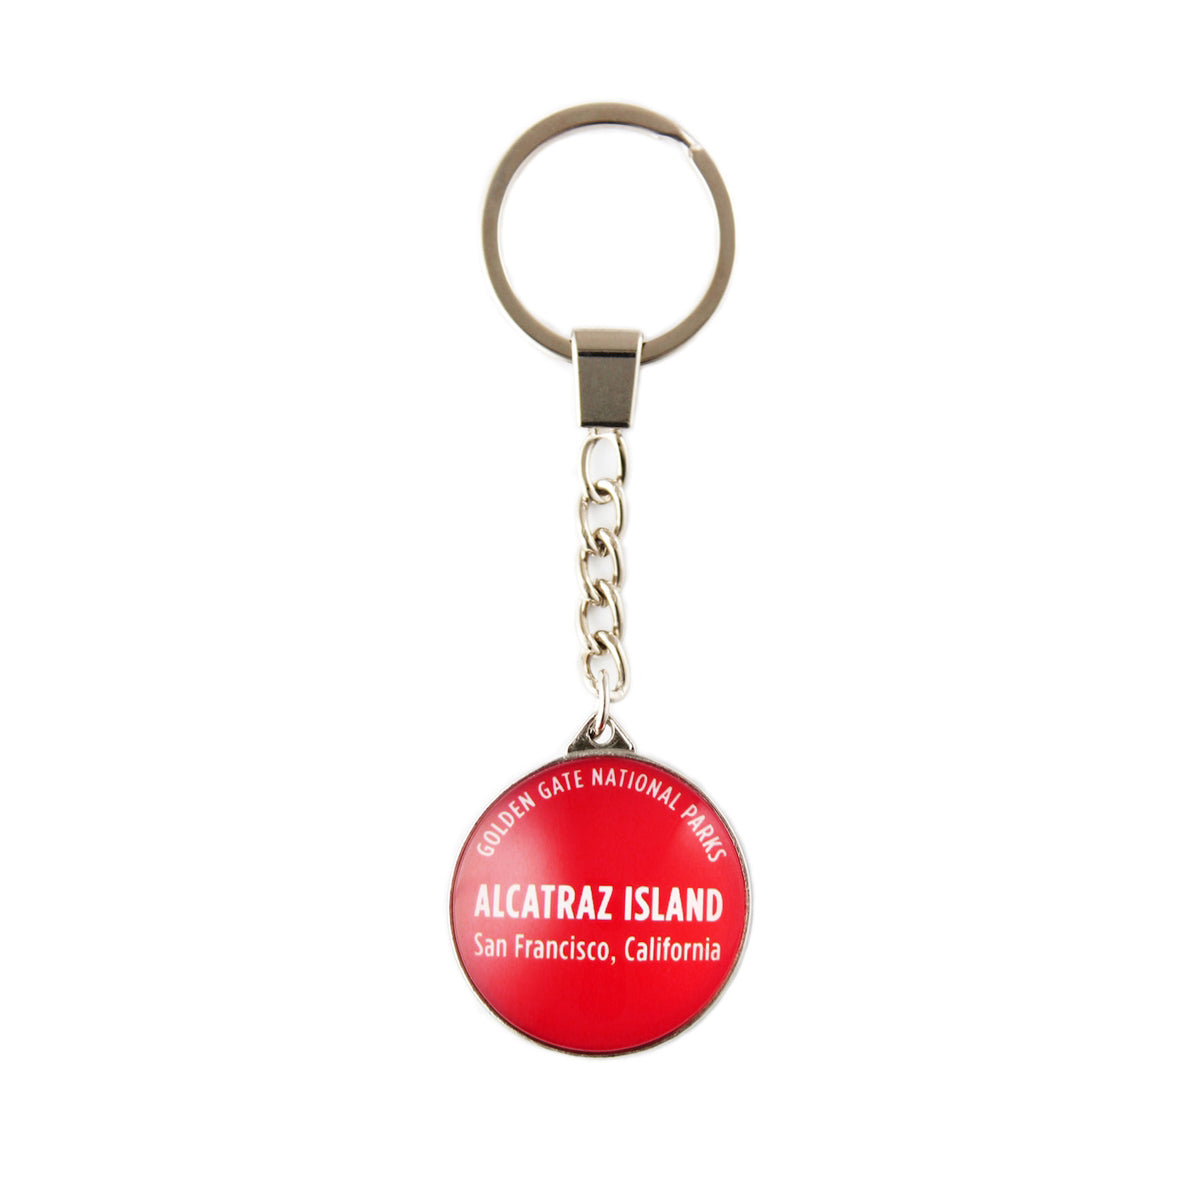 Colorful Alcatraz souvenir crystal keychain with text "Golden Gate National Parks Alcatraz Island San Francisco, California" in white on red background.